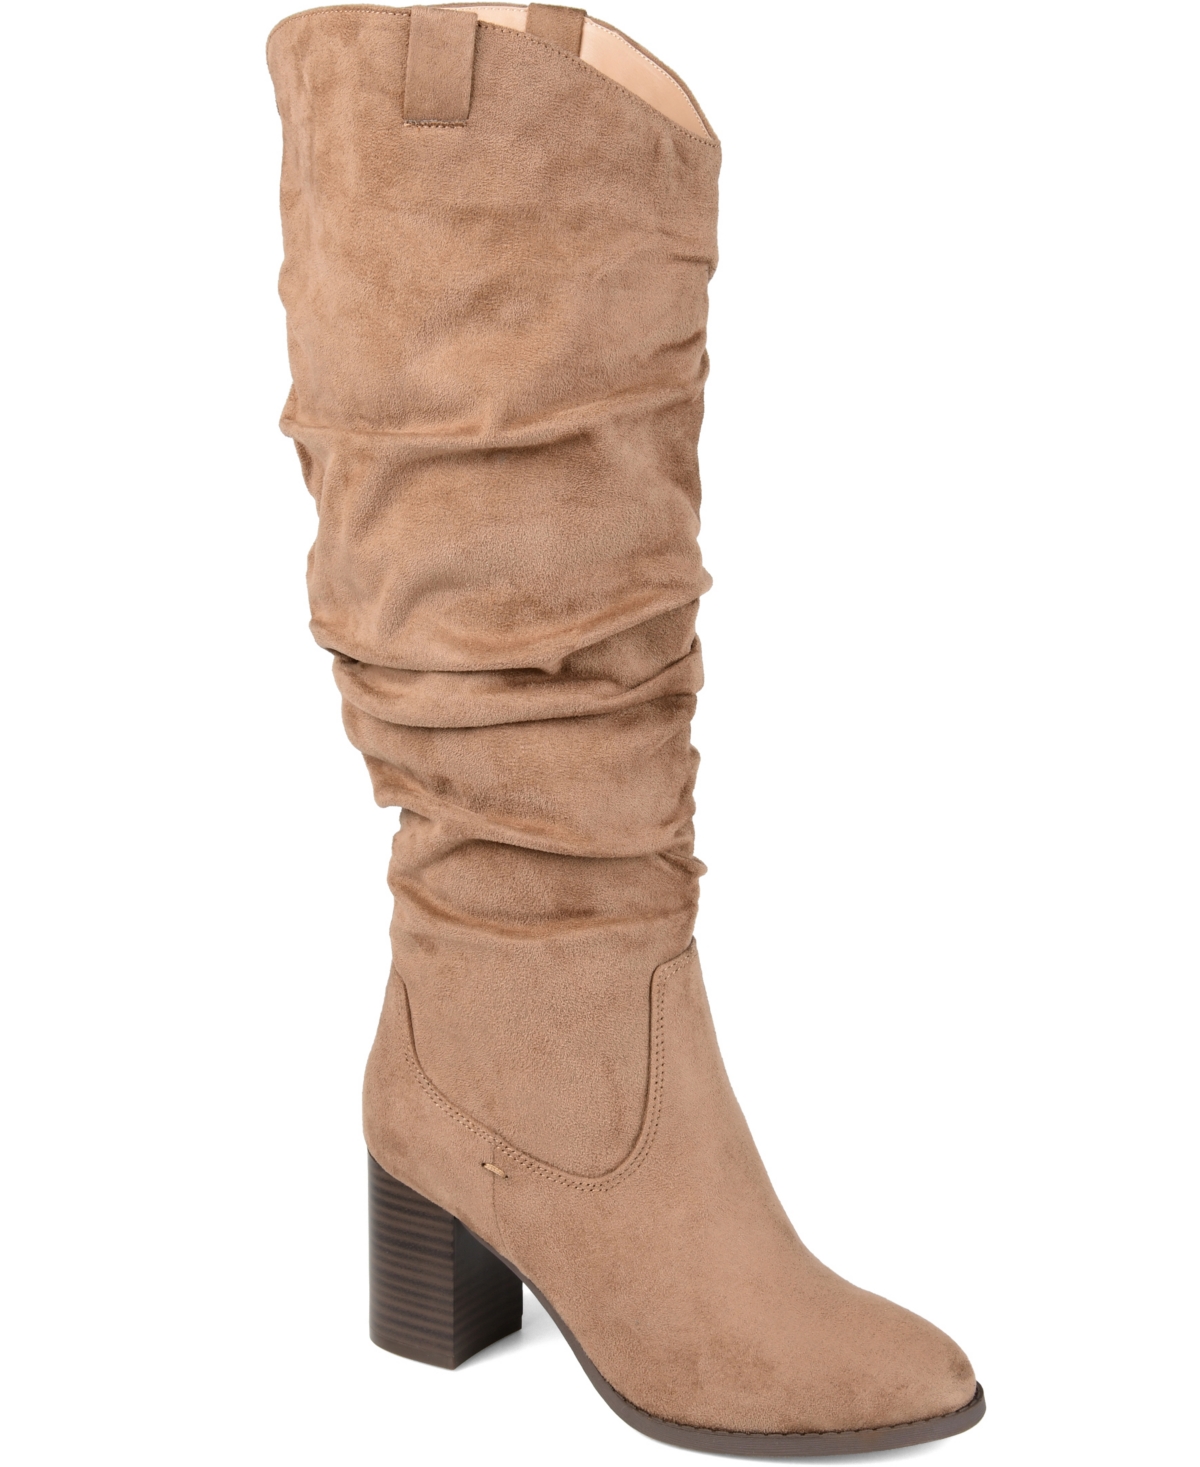 Vintage Shoes in Pictures | Shop Vintage Style Shoes Journee Collection Womens Aneil Wide Calf Boots - Taupe $82.49 AT vintagedancer.com